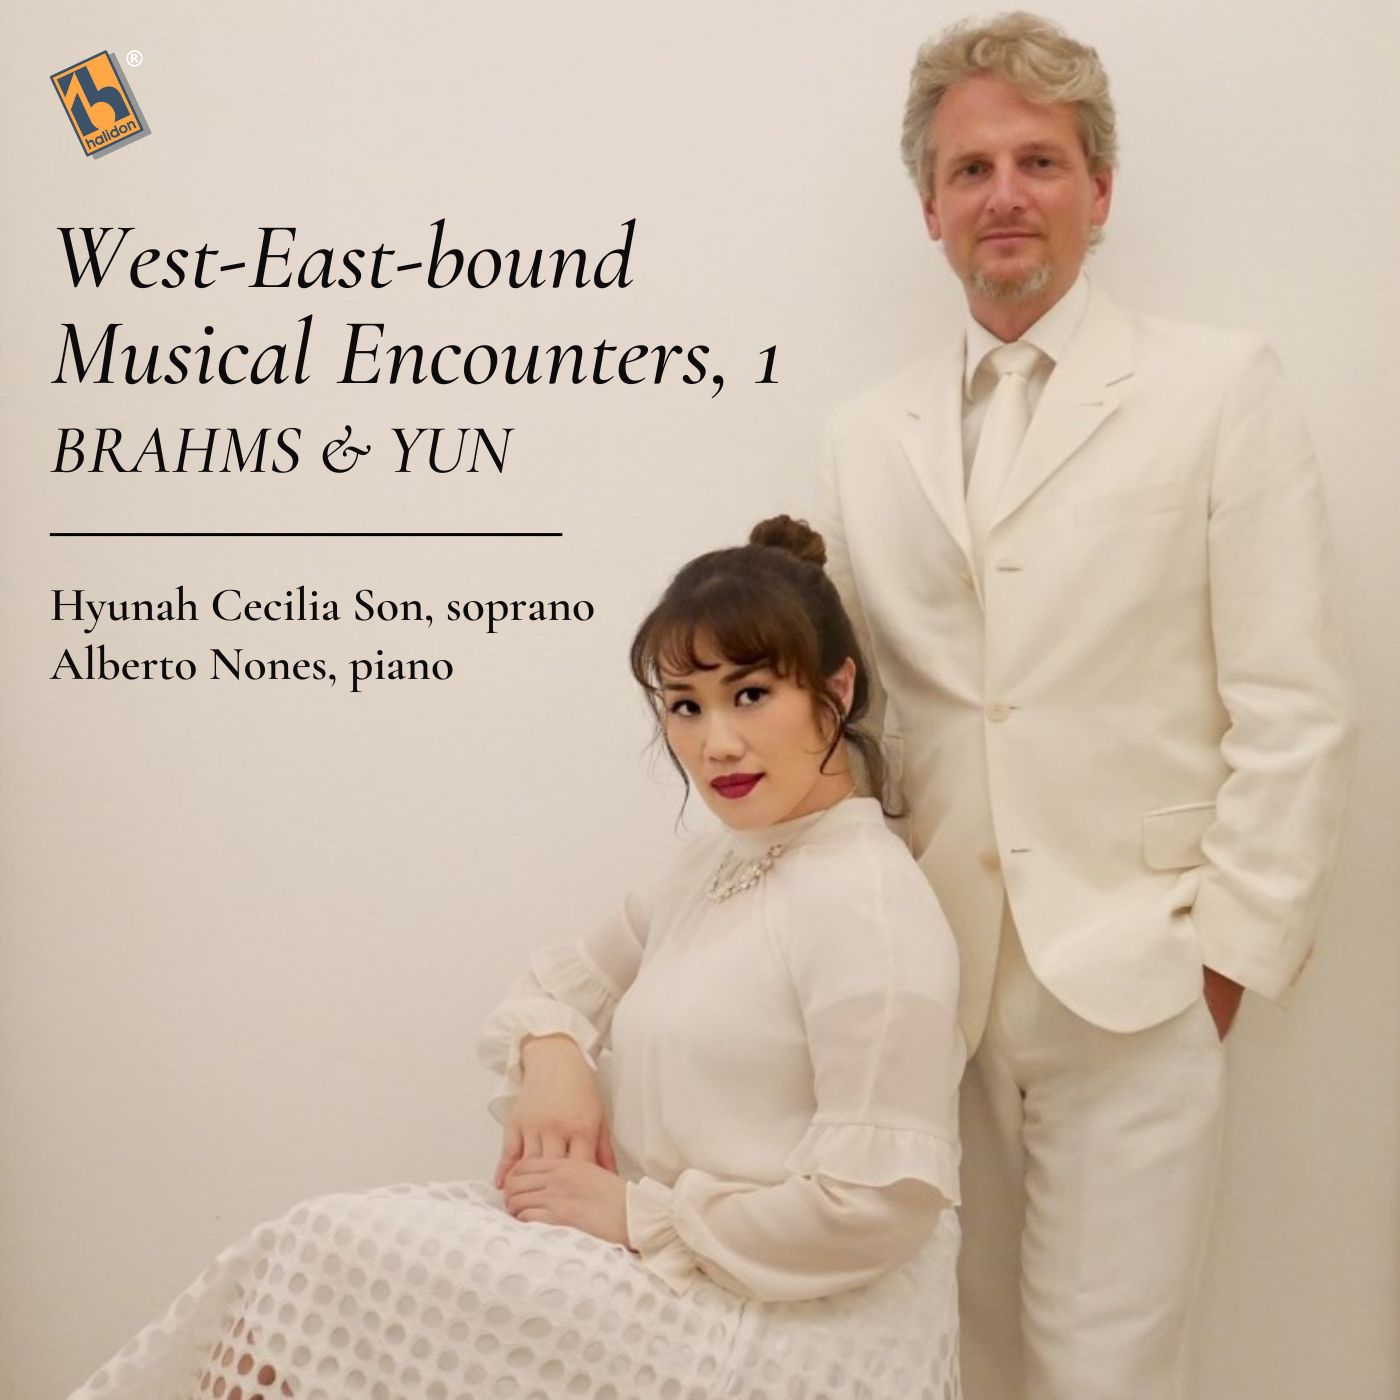 West-East-bound Musical Encounters, 1: Brahms & Yun